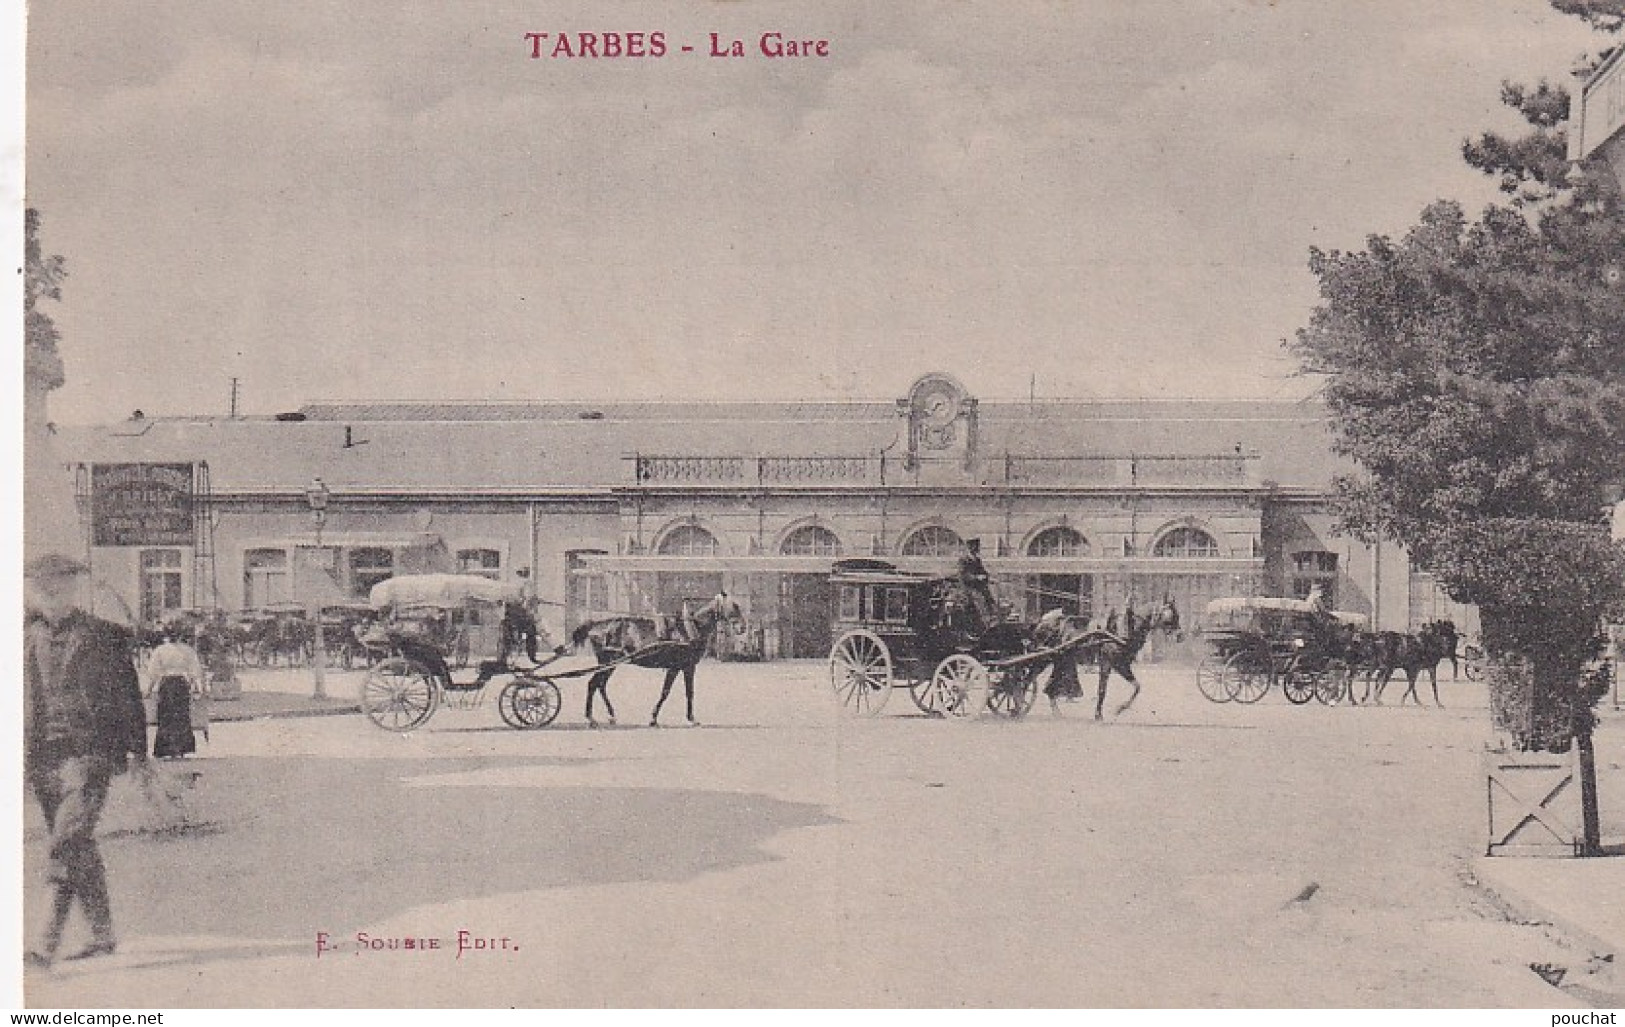 Z+ Nw-(65) TARBES - LA GARE - ANIMATION - CALECHES - Tarbes